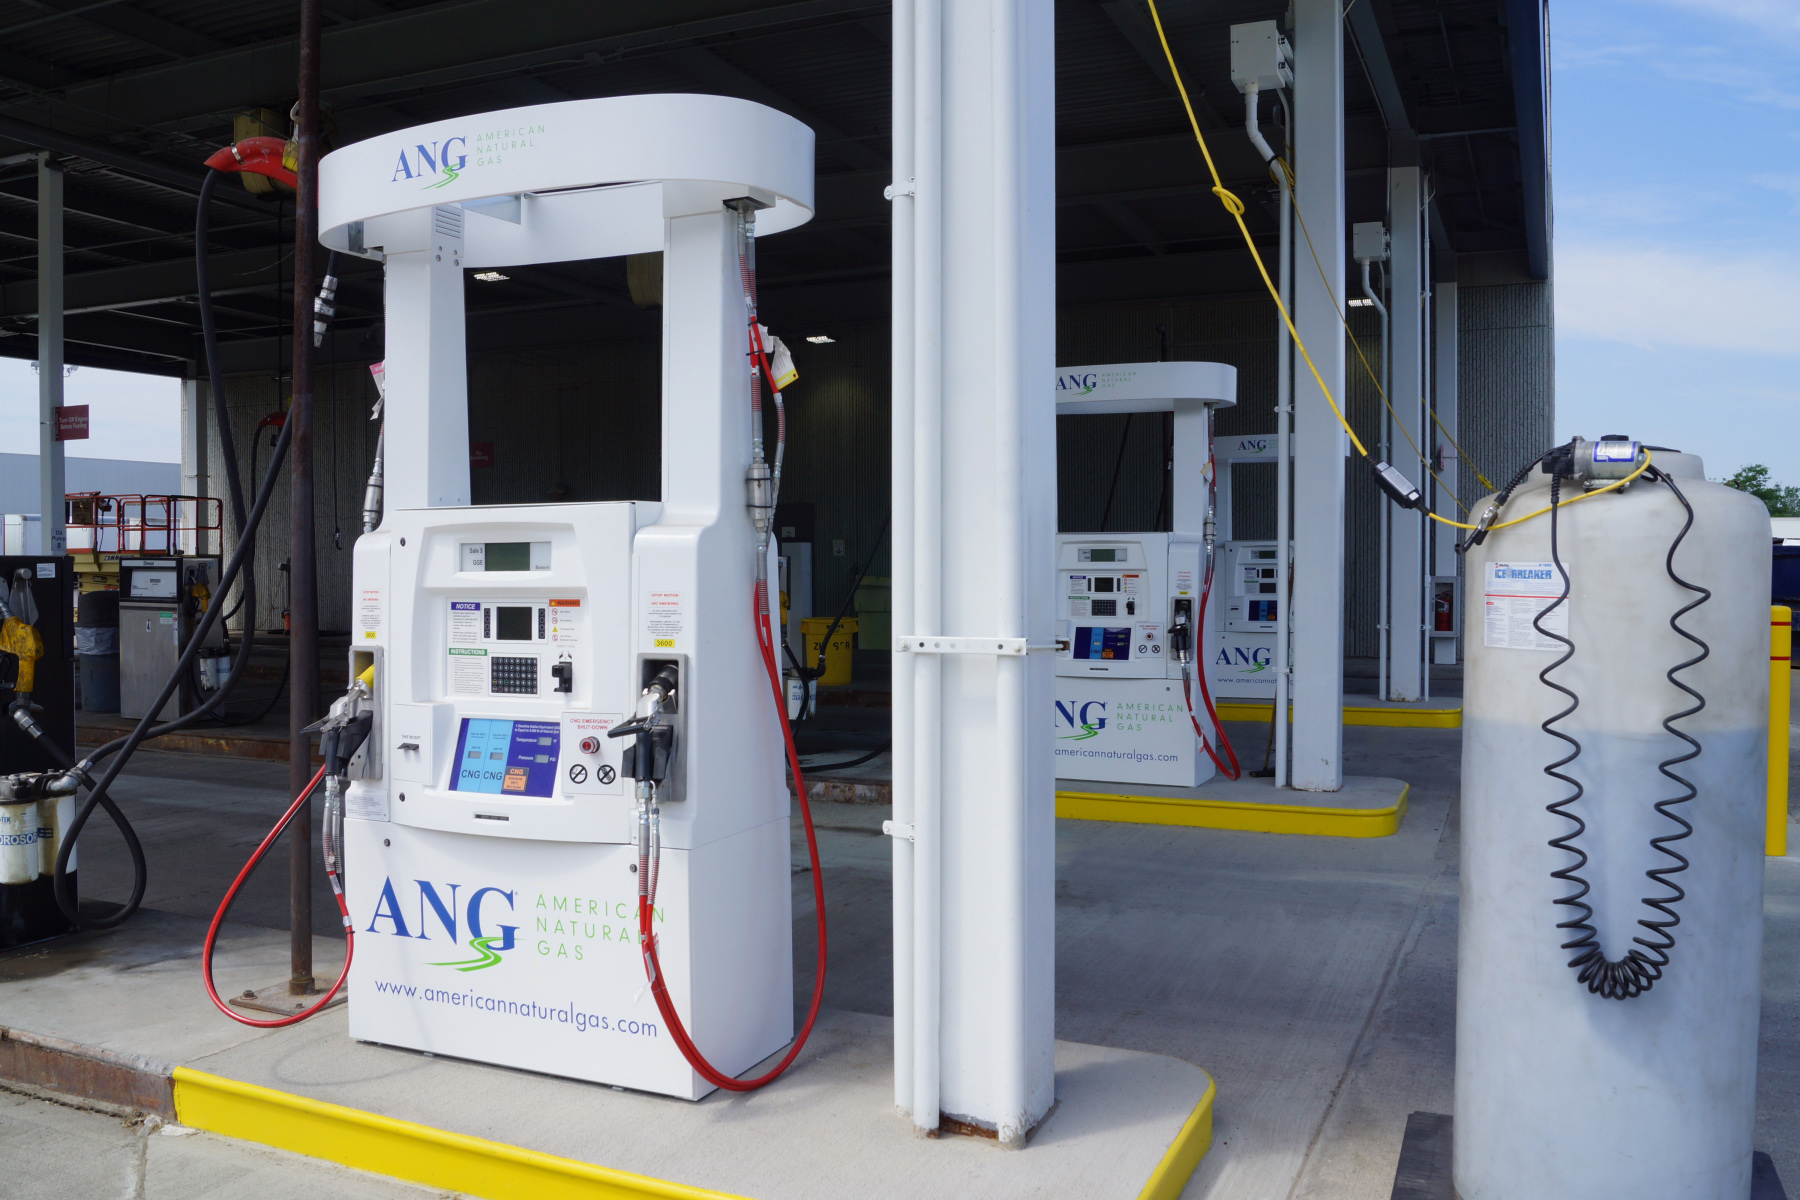 ANG Announces New CNG Station at Tops' Distribution Center